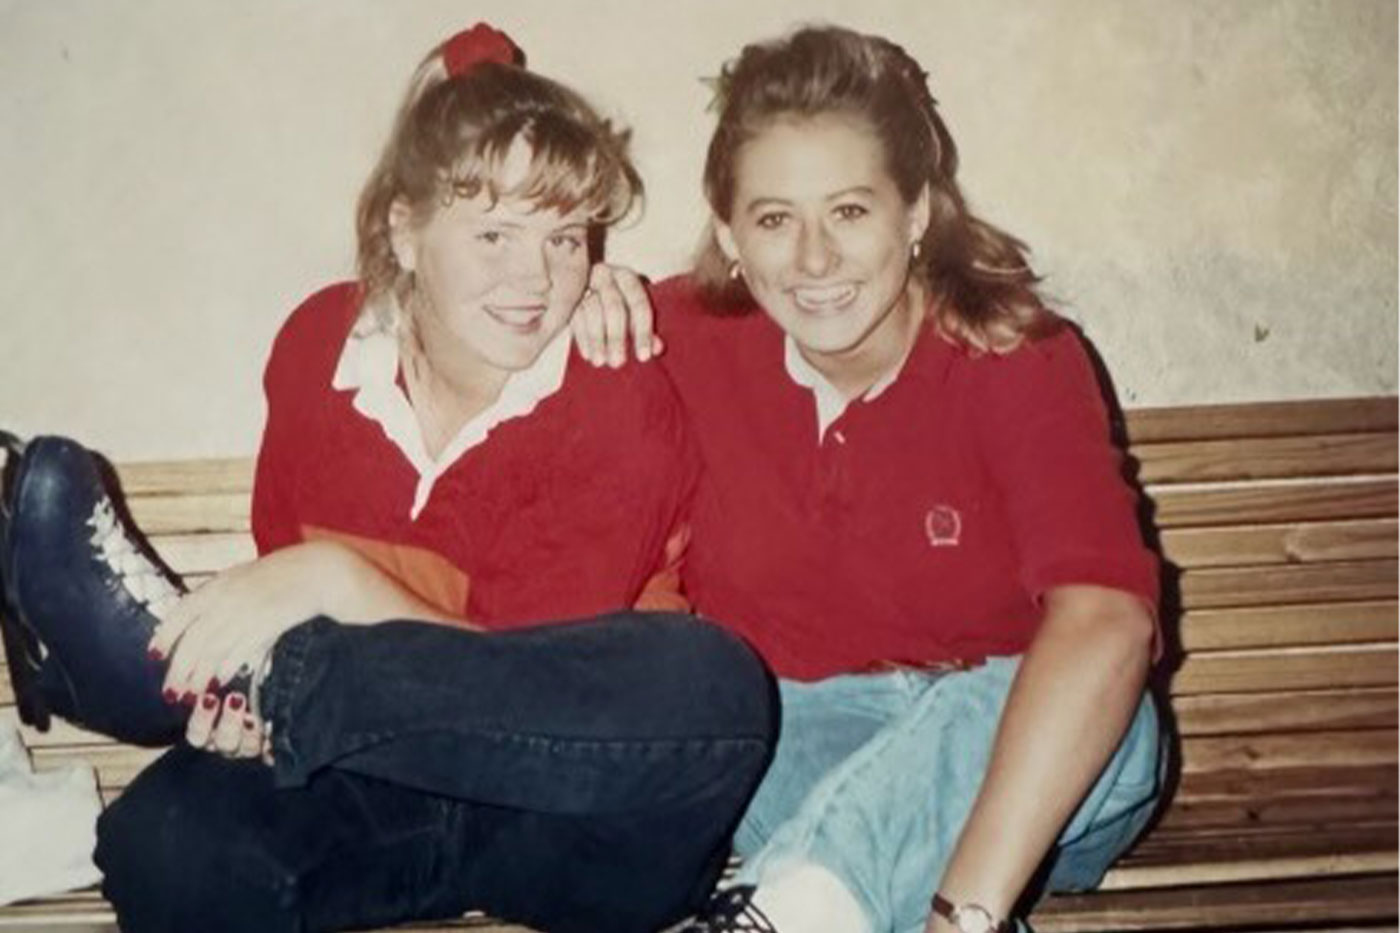 Lizzy and Teri have been best friends since high school.